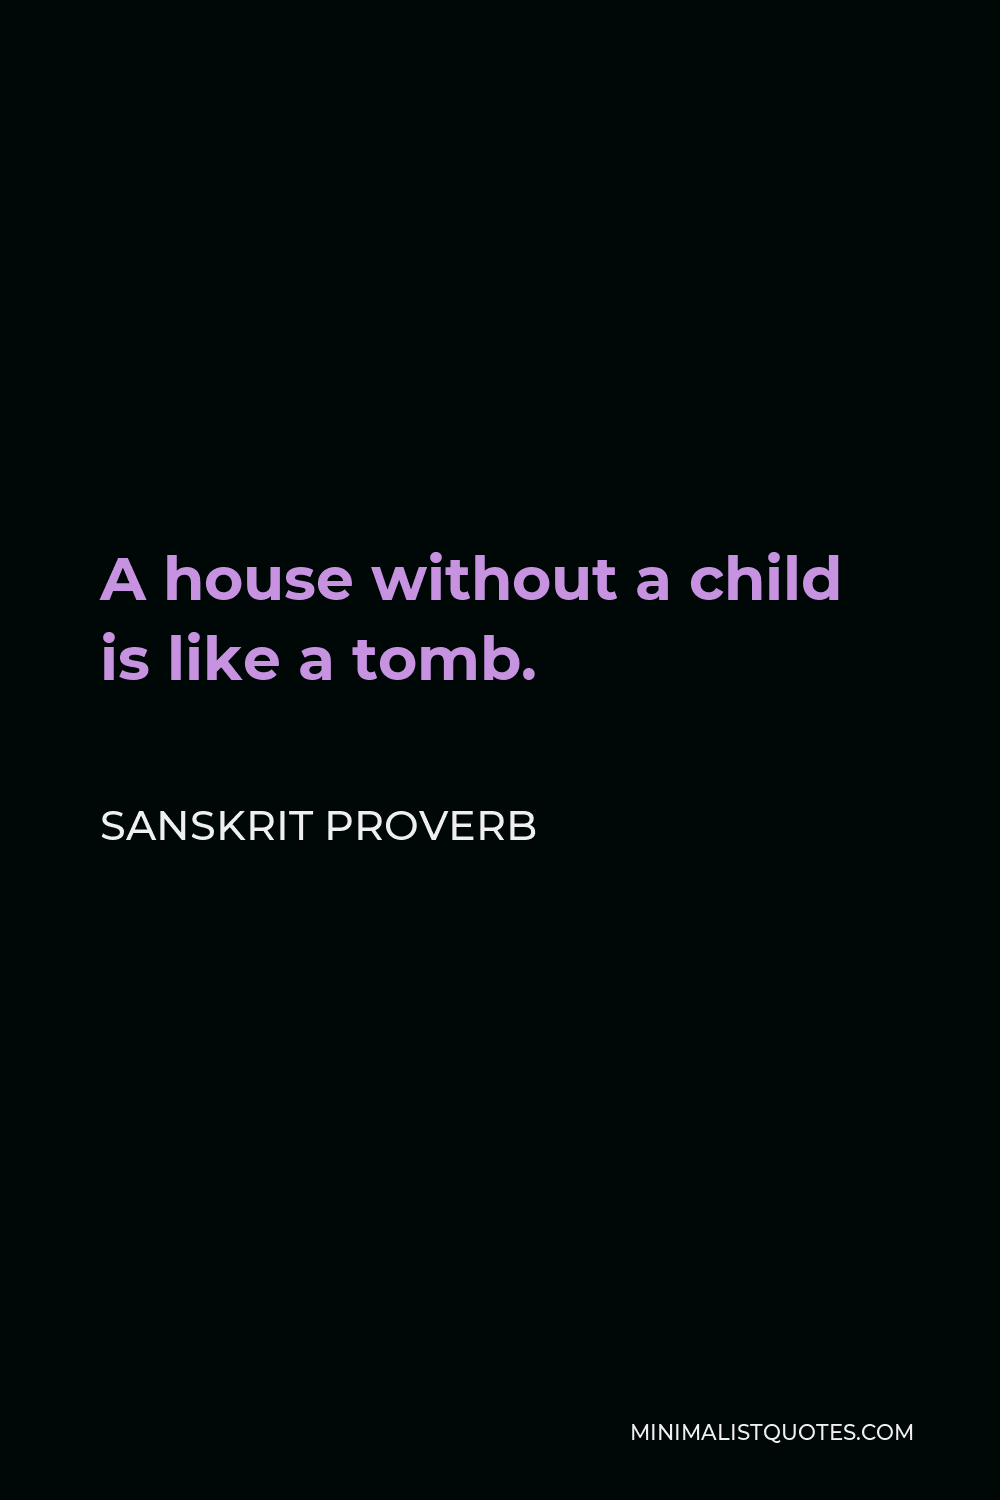 Sanskrit Proverb Quote - A house without a child is like a tomb.